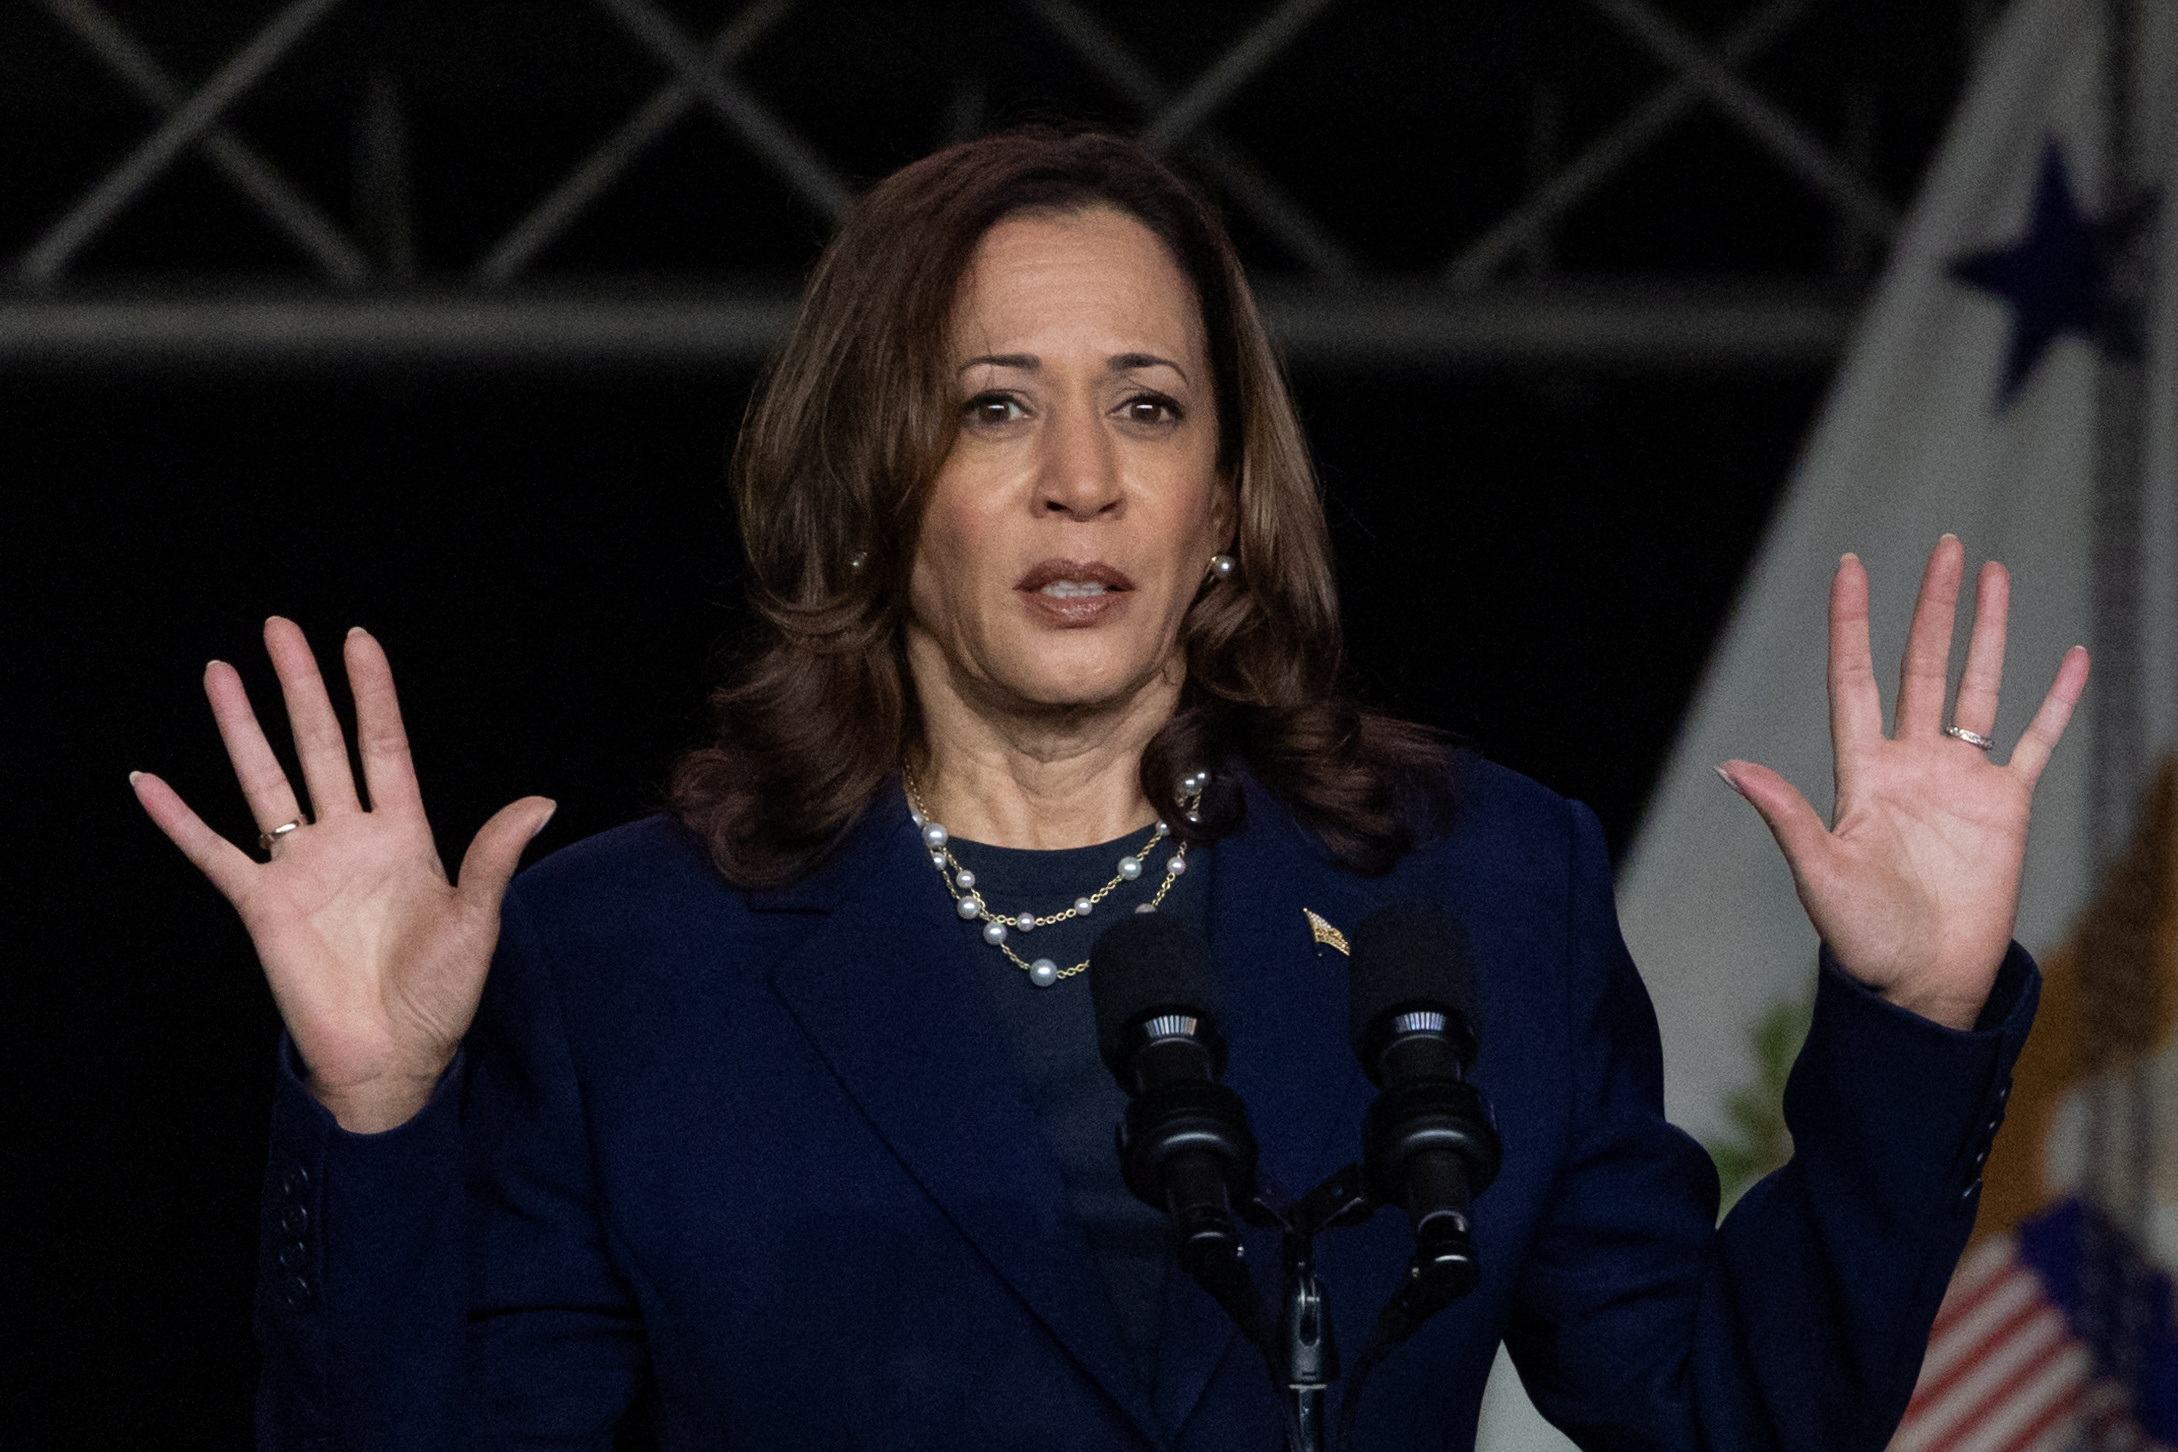 ‘Is she Indian or Black?’ Trump questions Harris’ identity at Black journalists’ convention